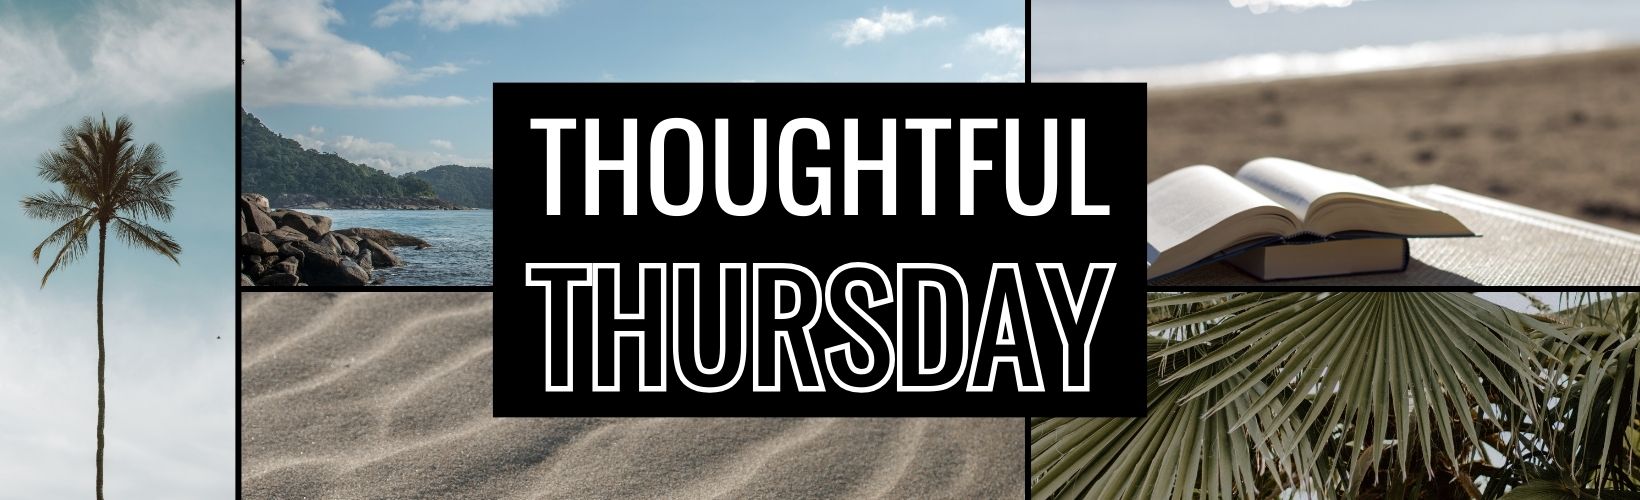 Thoughtful Thursday: How to Be Thoughtful in Your Friendships